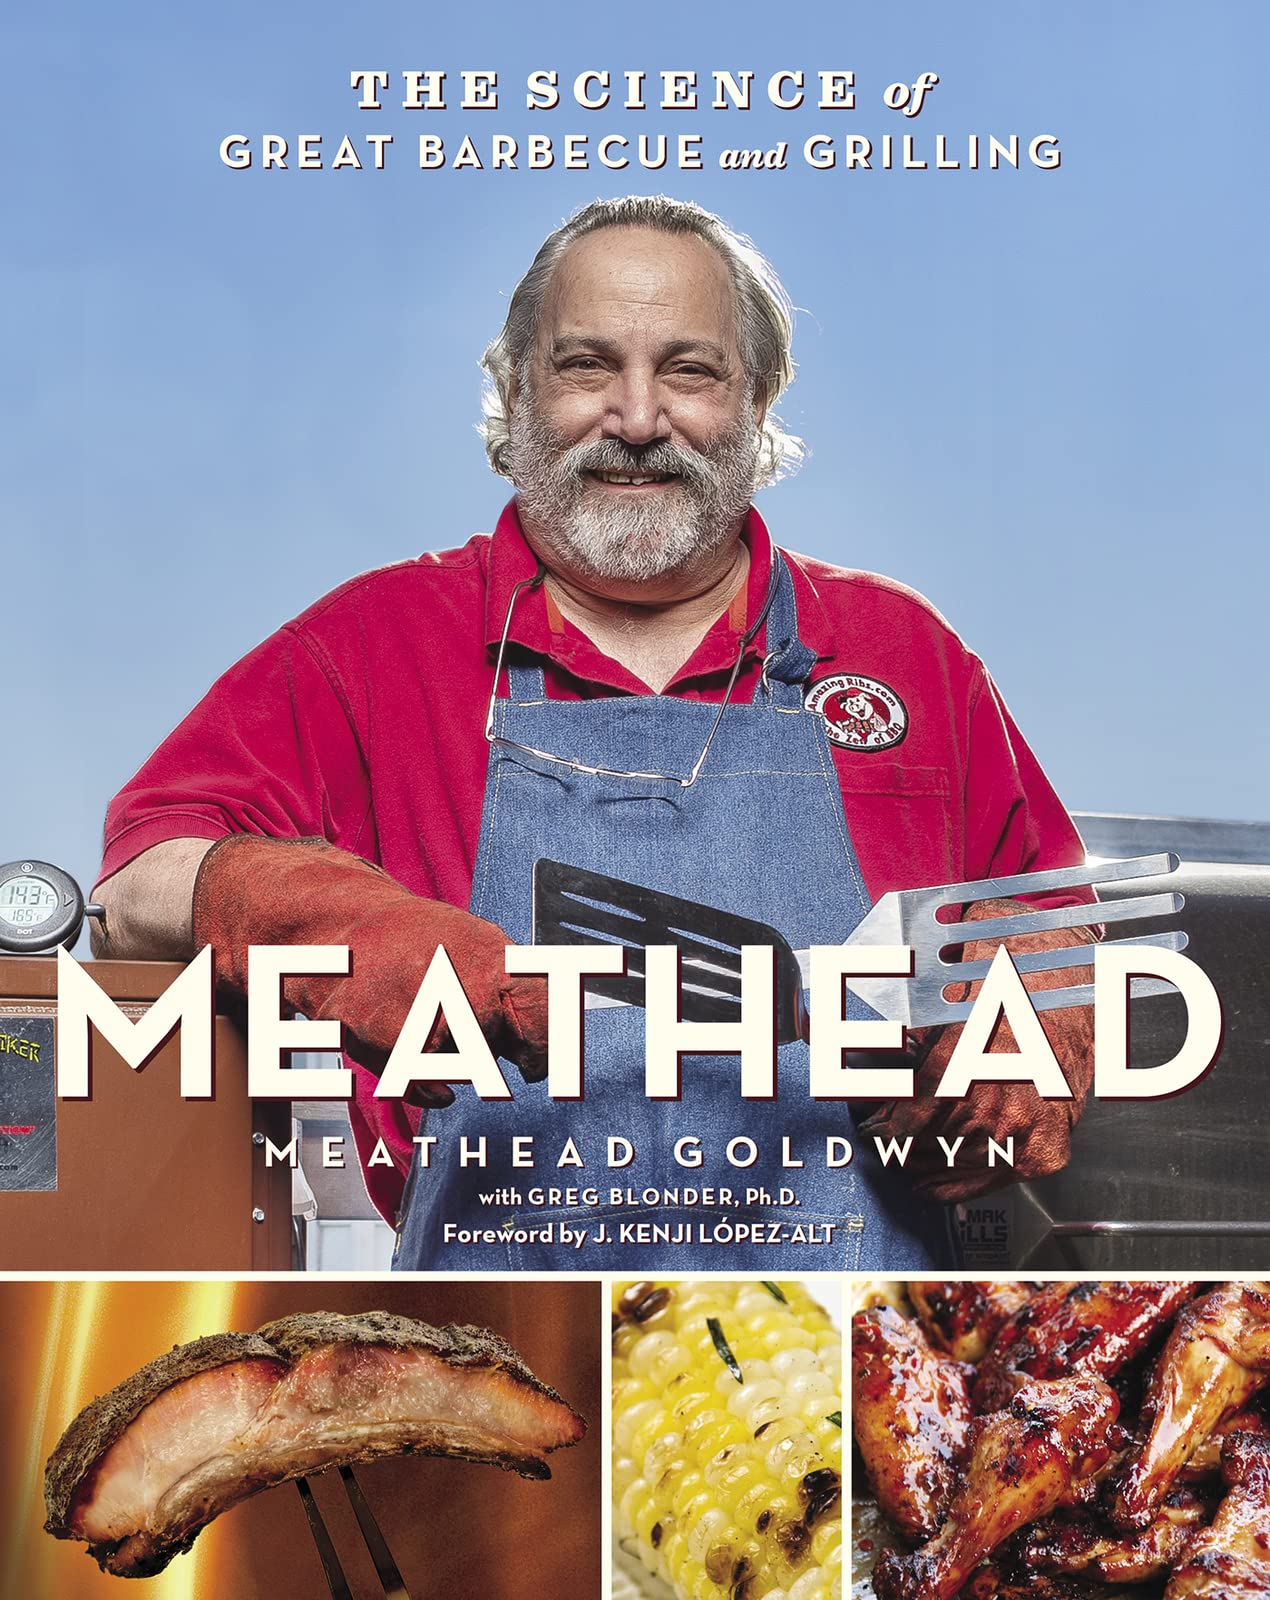 Meathead: The Science of Great Barbecue and Grilling (Meathead Goldwyn)